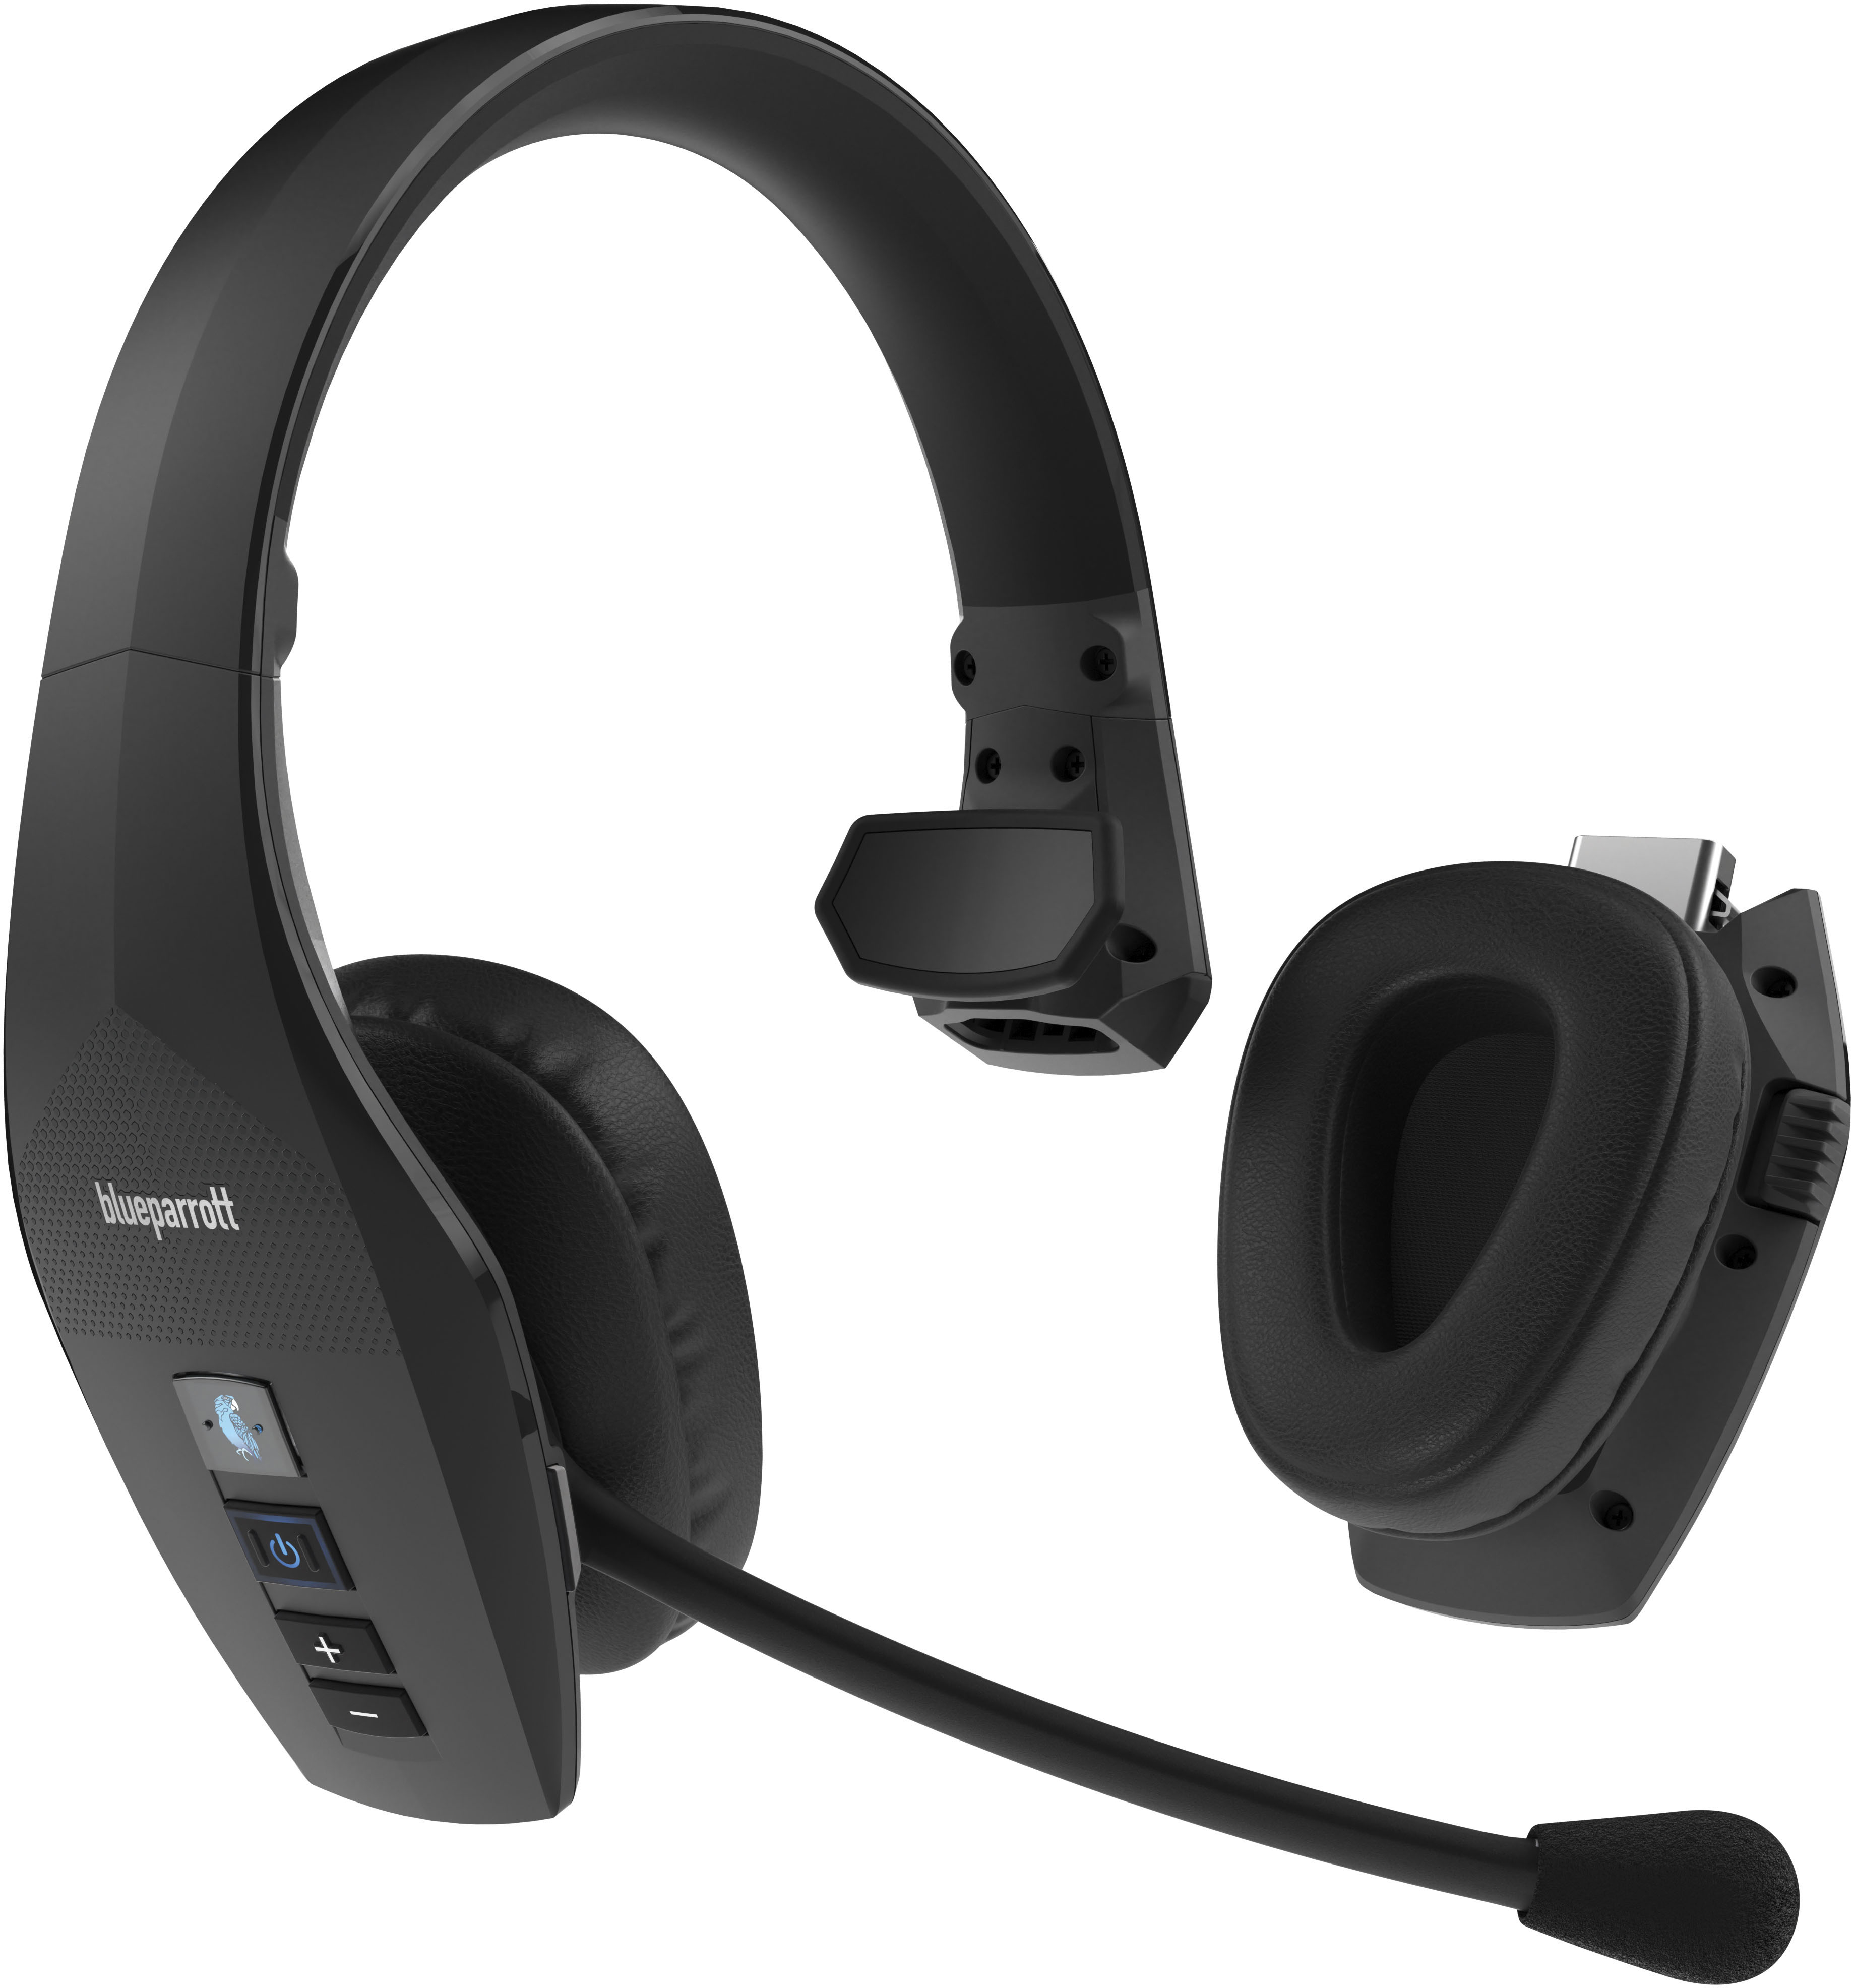 204292 - with Headset Noise Best Cancellation Black BlueParrott Wireless Buy S650-XT Convertible 2-in1 Active